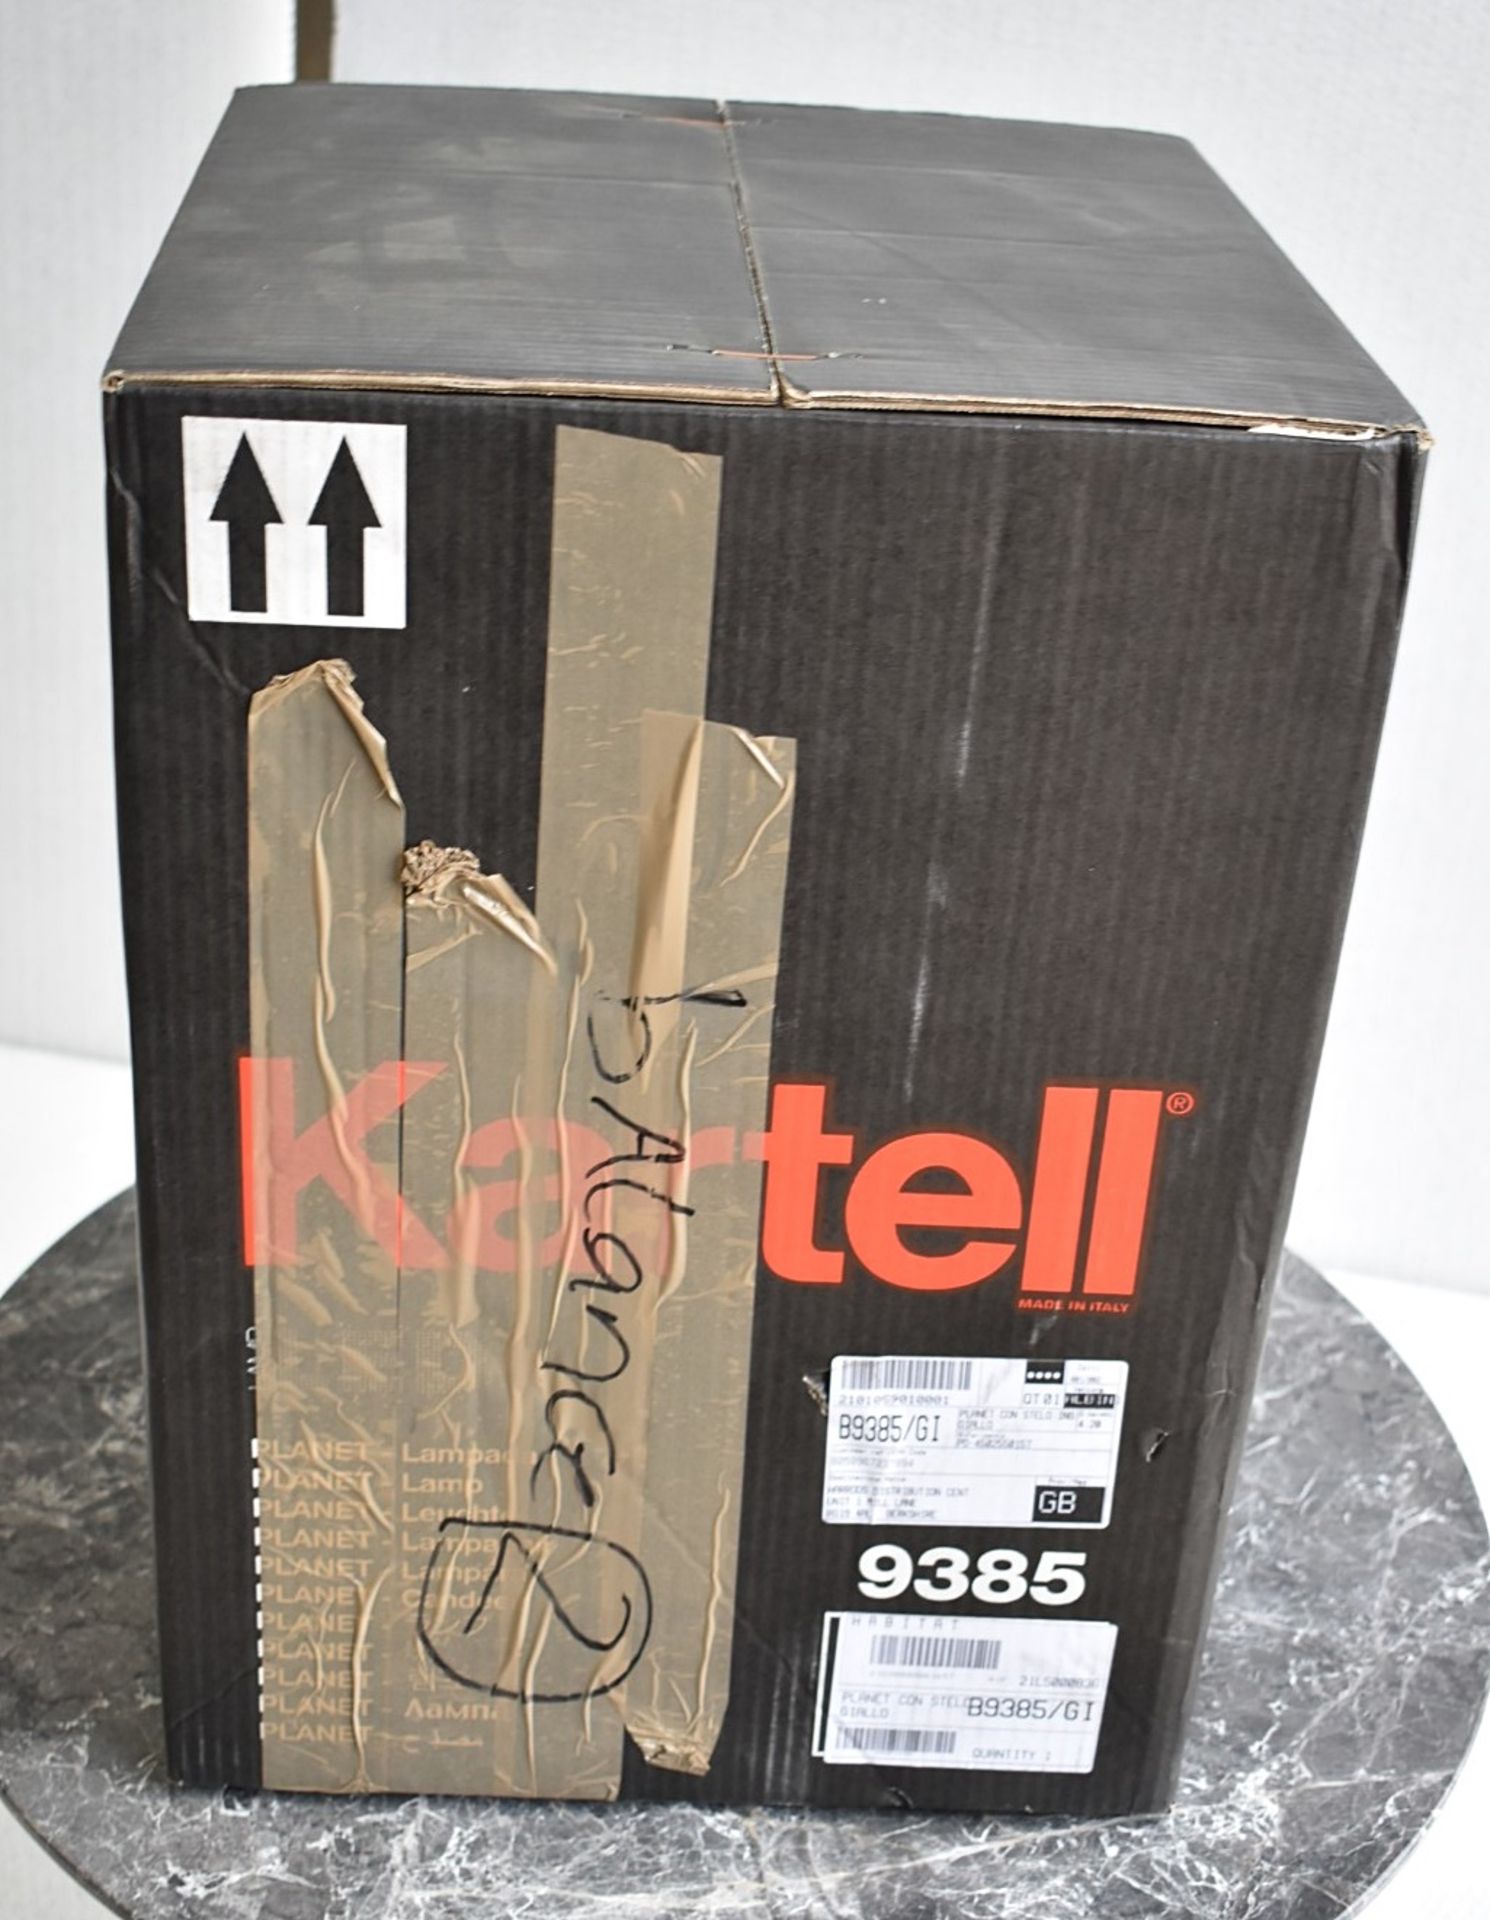 1 x KARTELL 'Planet' Designer Table Lamp In Yellow - Sealed Boxed Stock - Original RRP £524.00 - Image 8 of 8